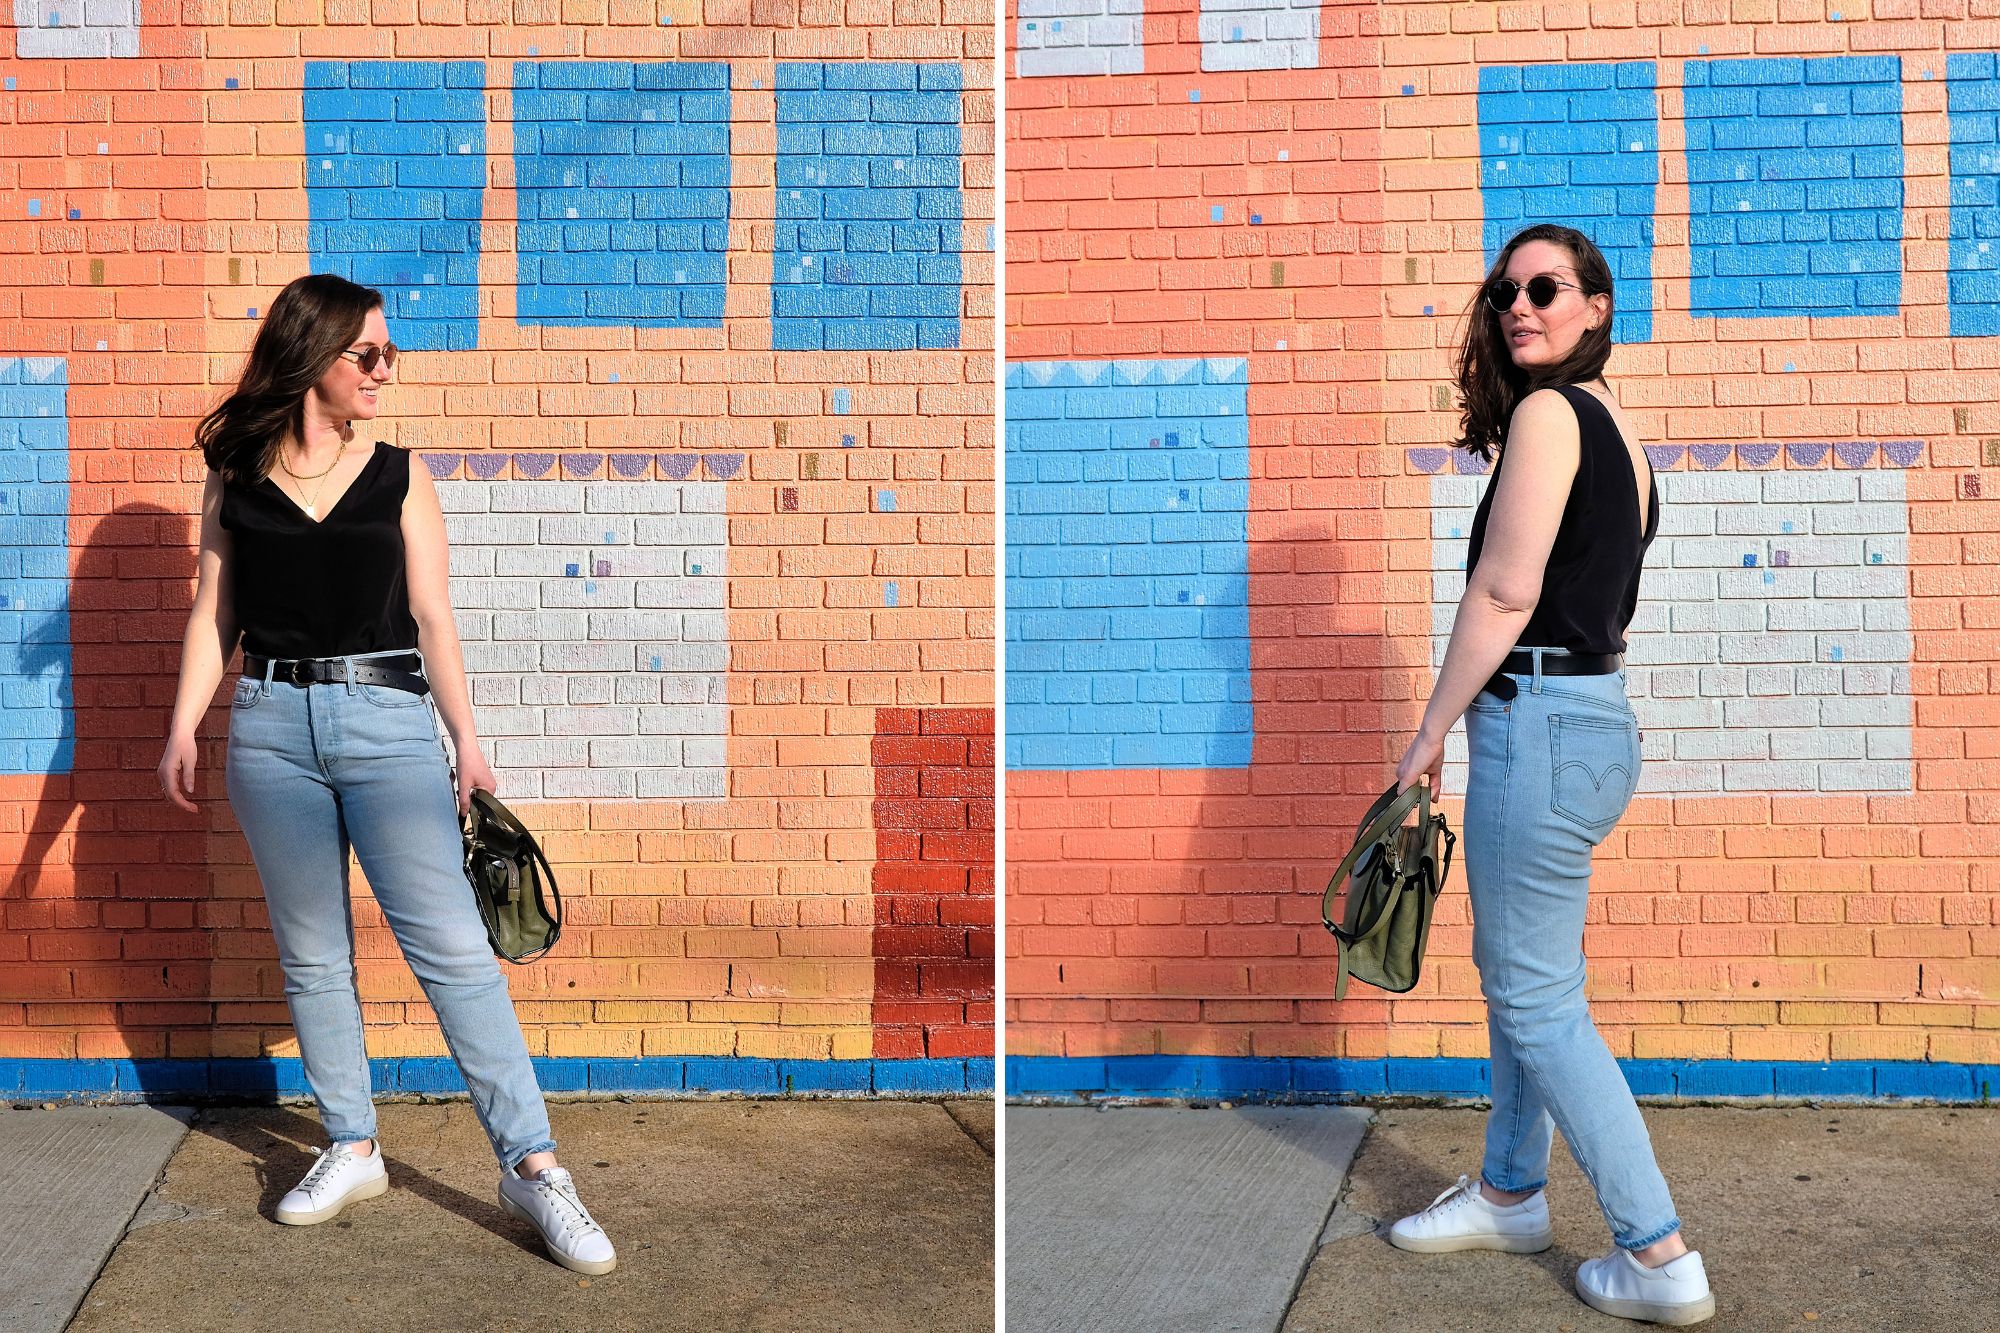 Alyssa wears a v-neck silk tank, jeans, and sneakers in two photos